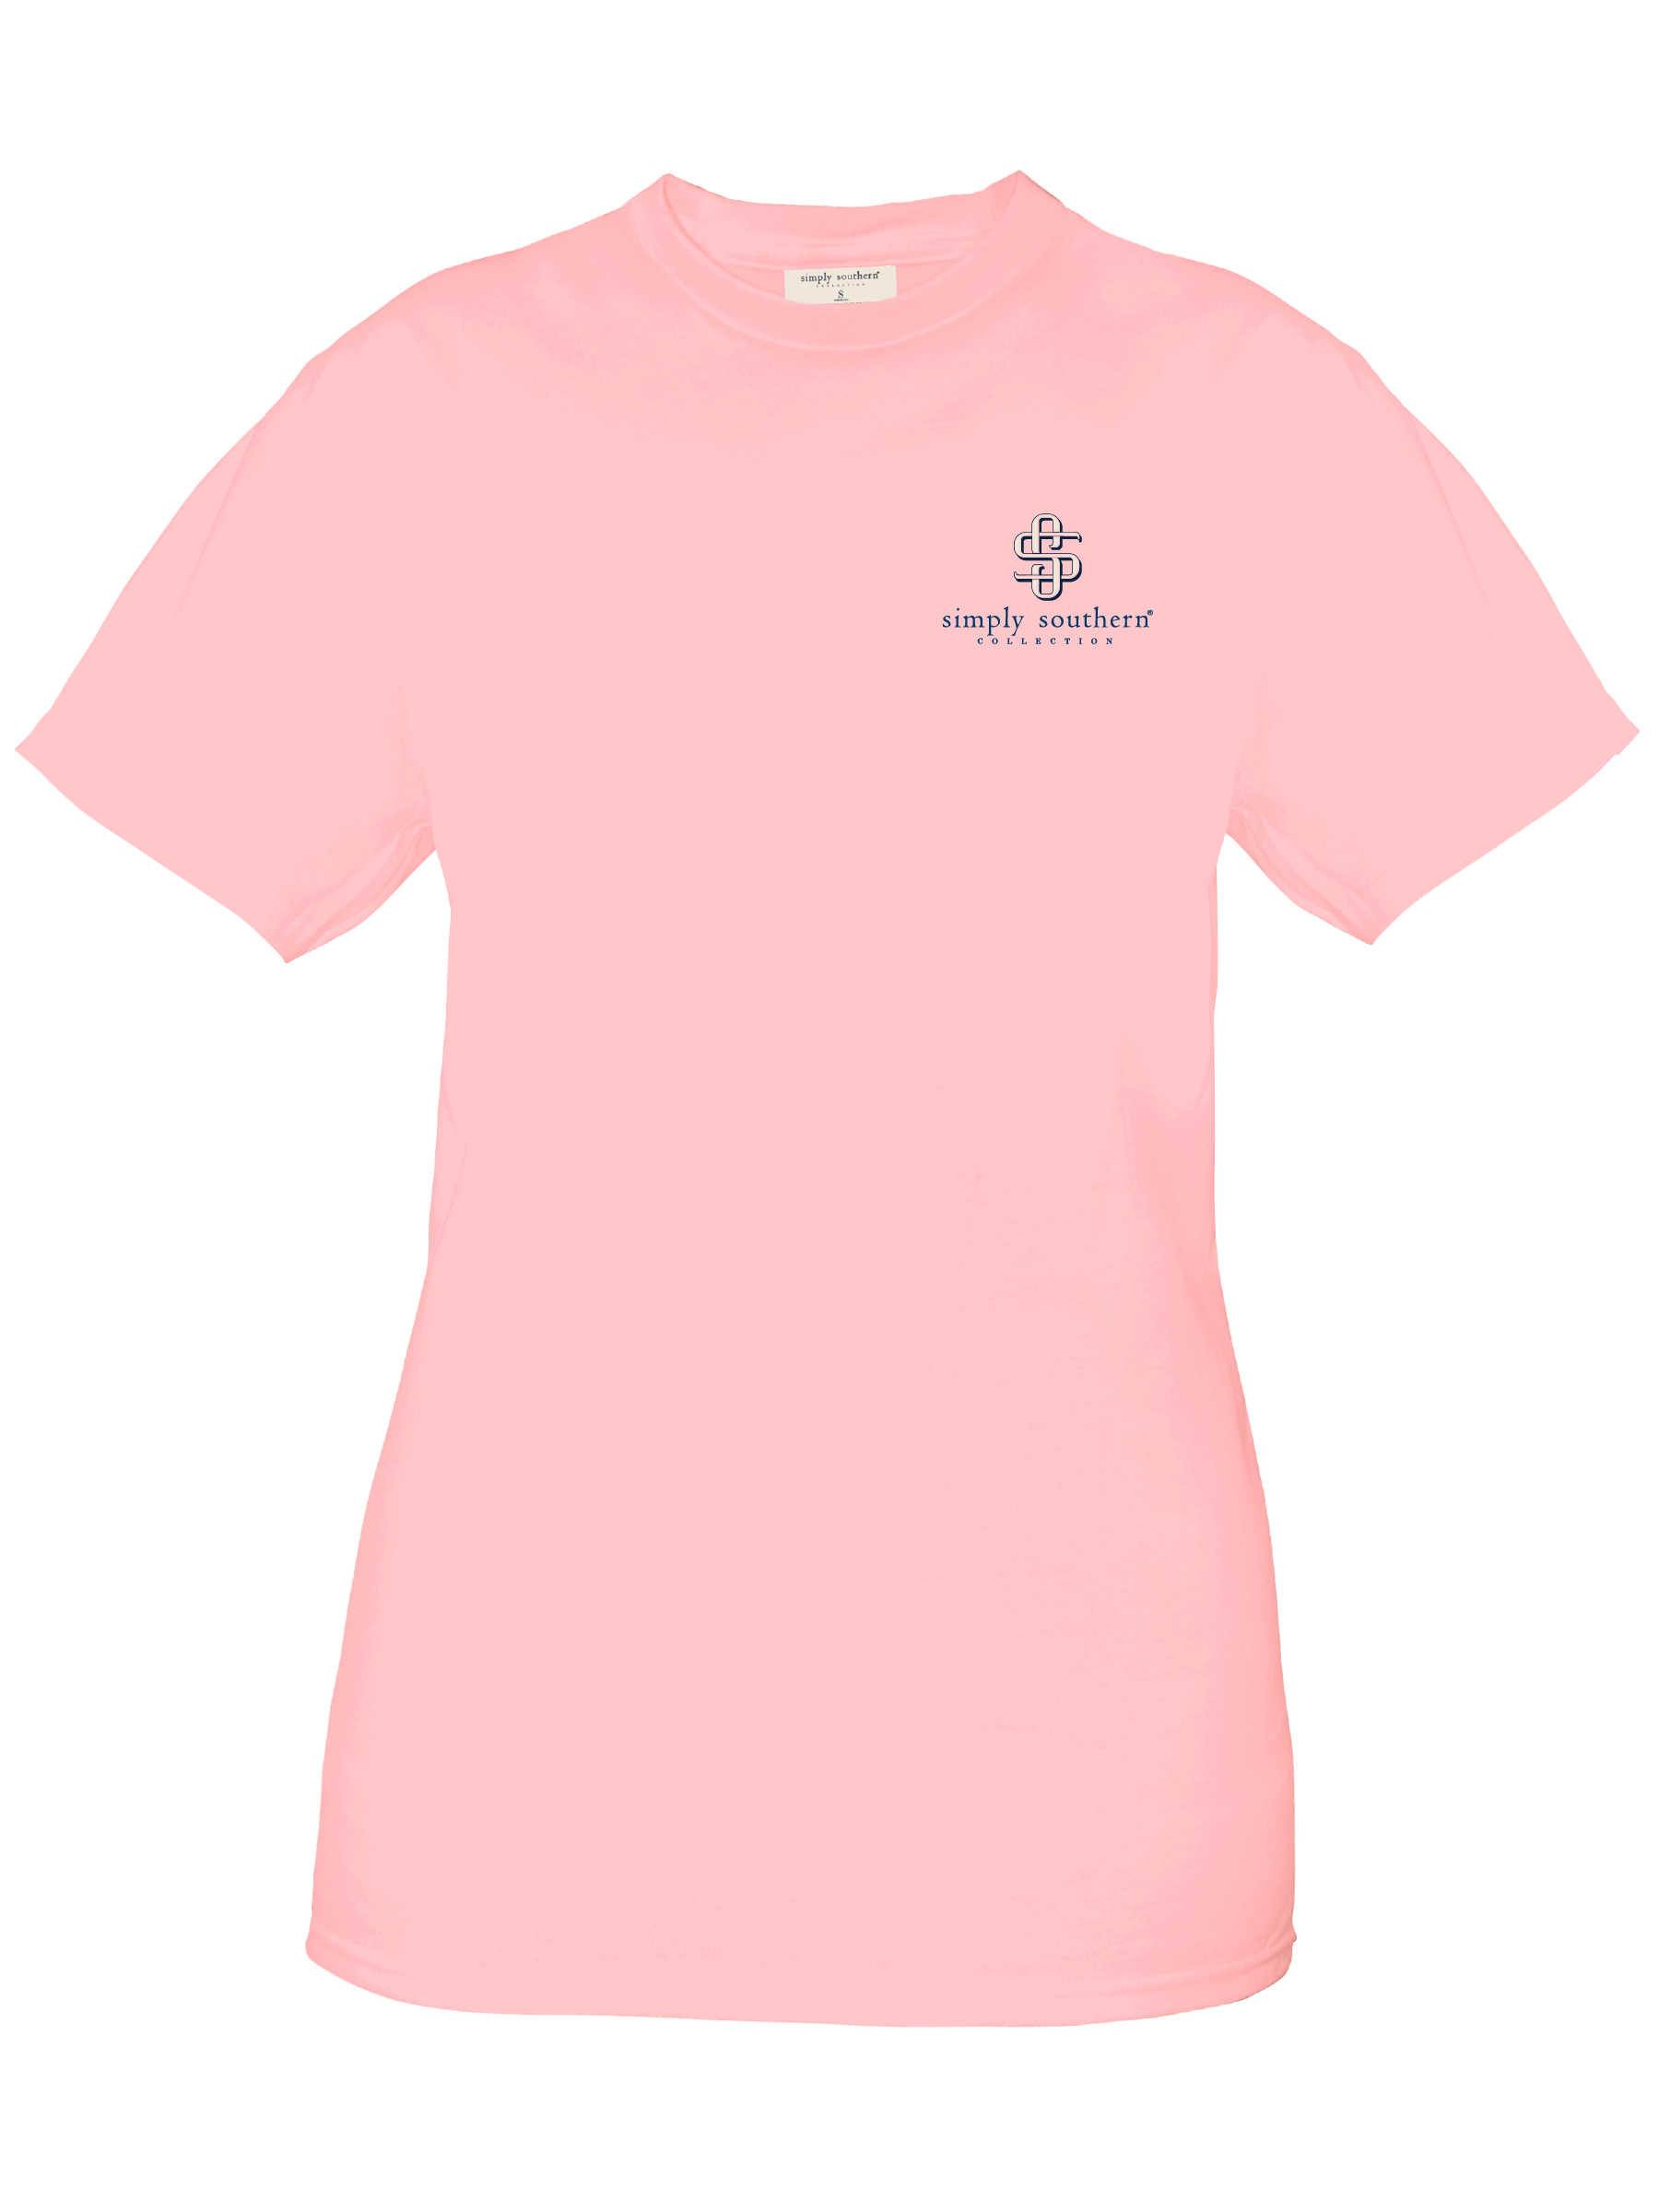 'Country Chick' Short Sleeve Tee by Simply Southern